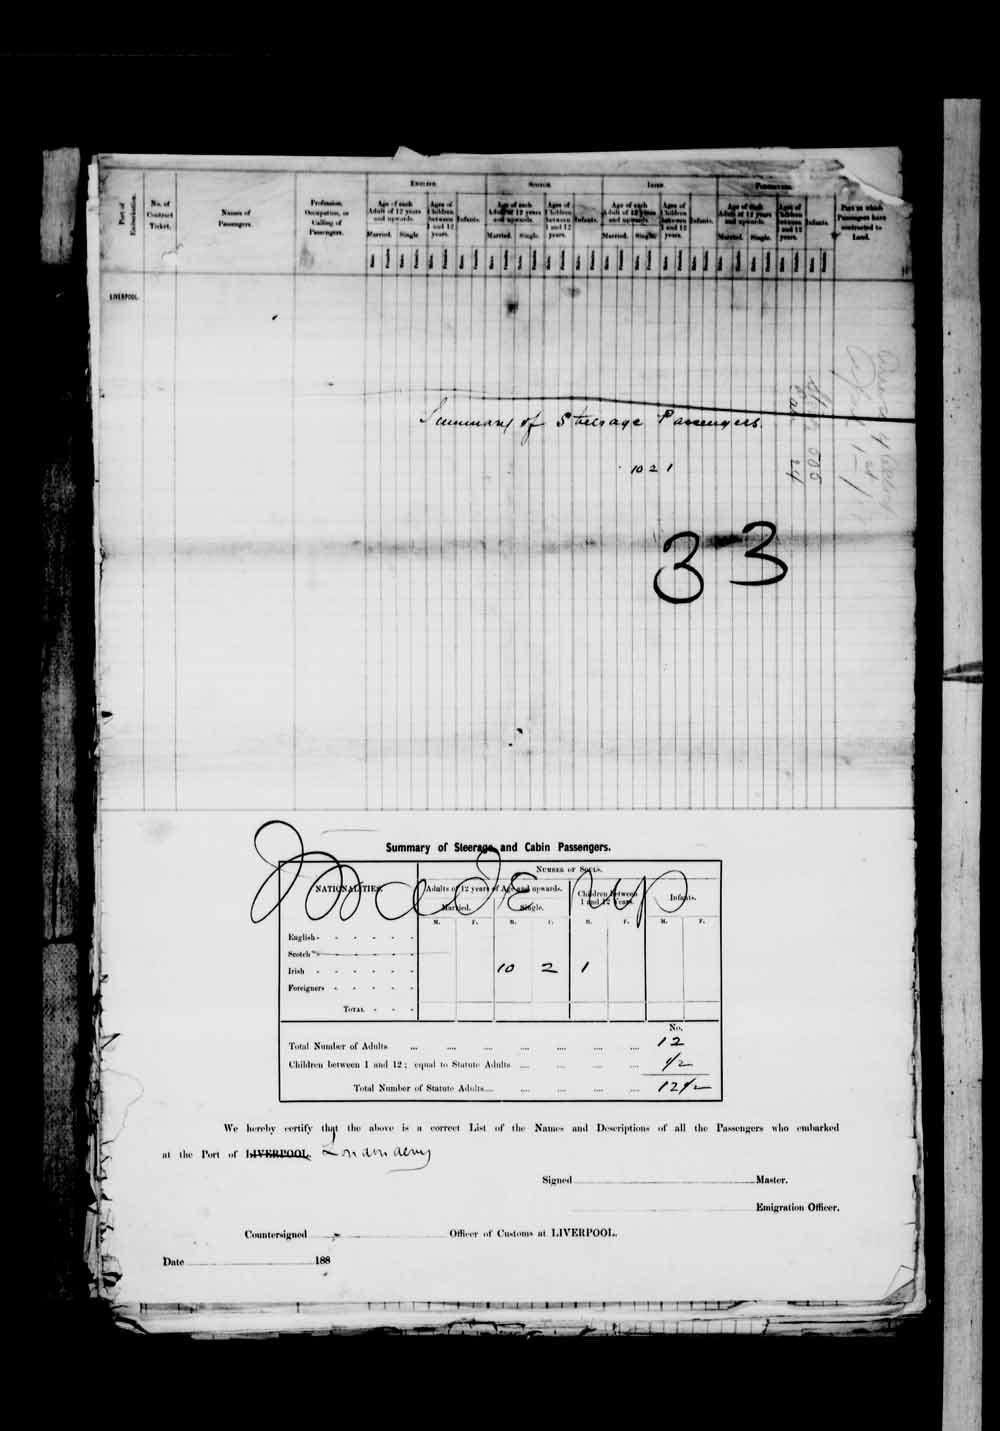 Digitized page of Passenger Lists for Image No.: e003674507